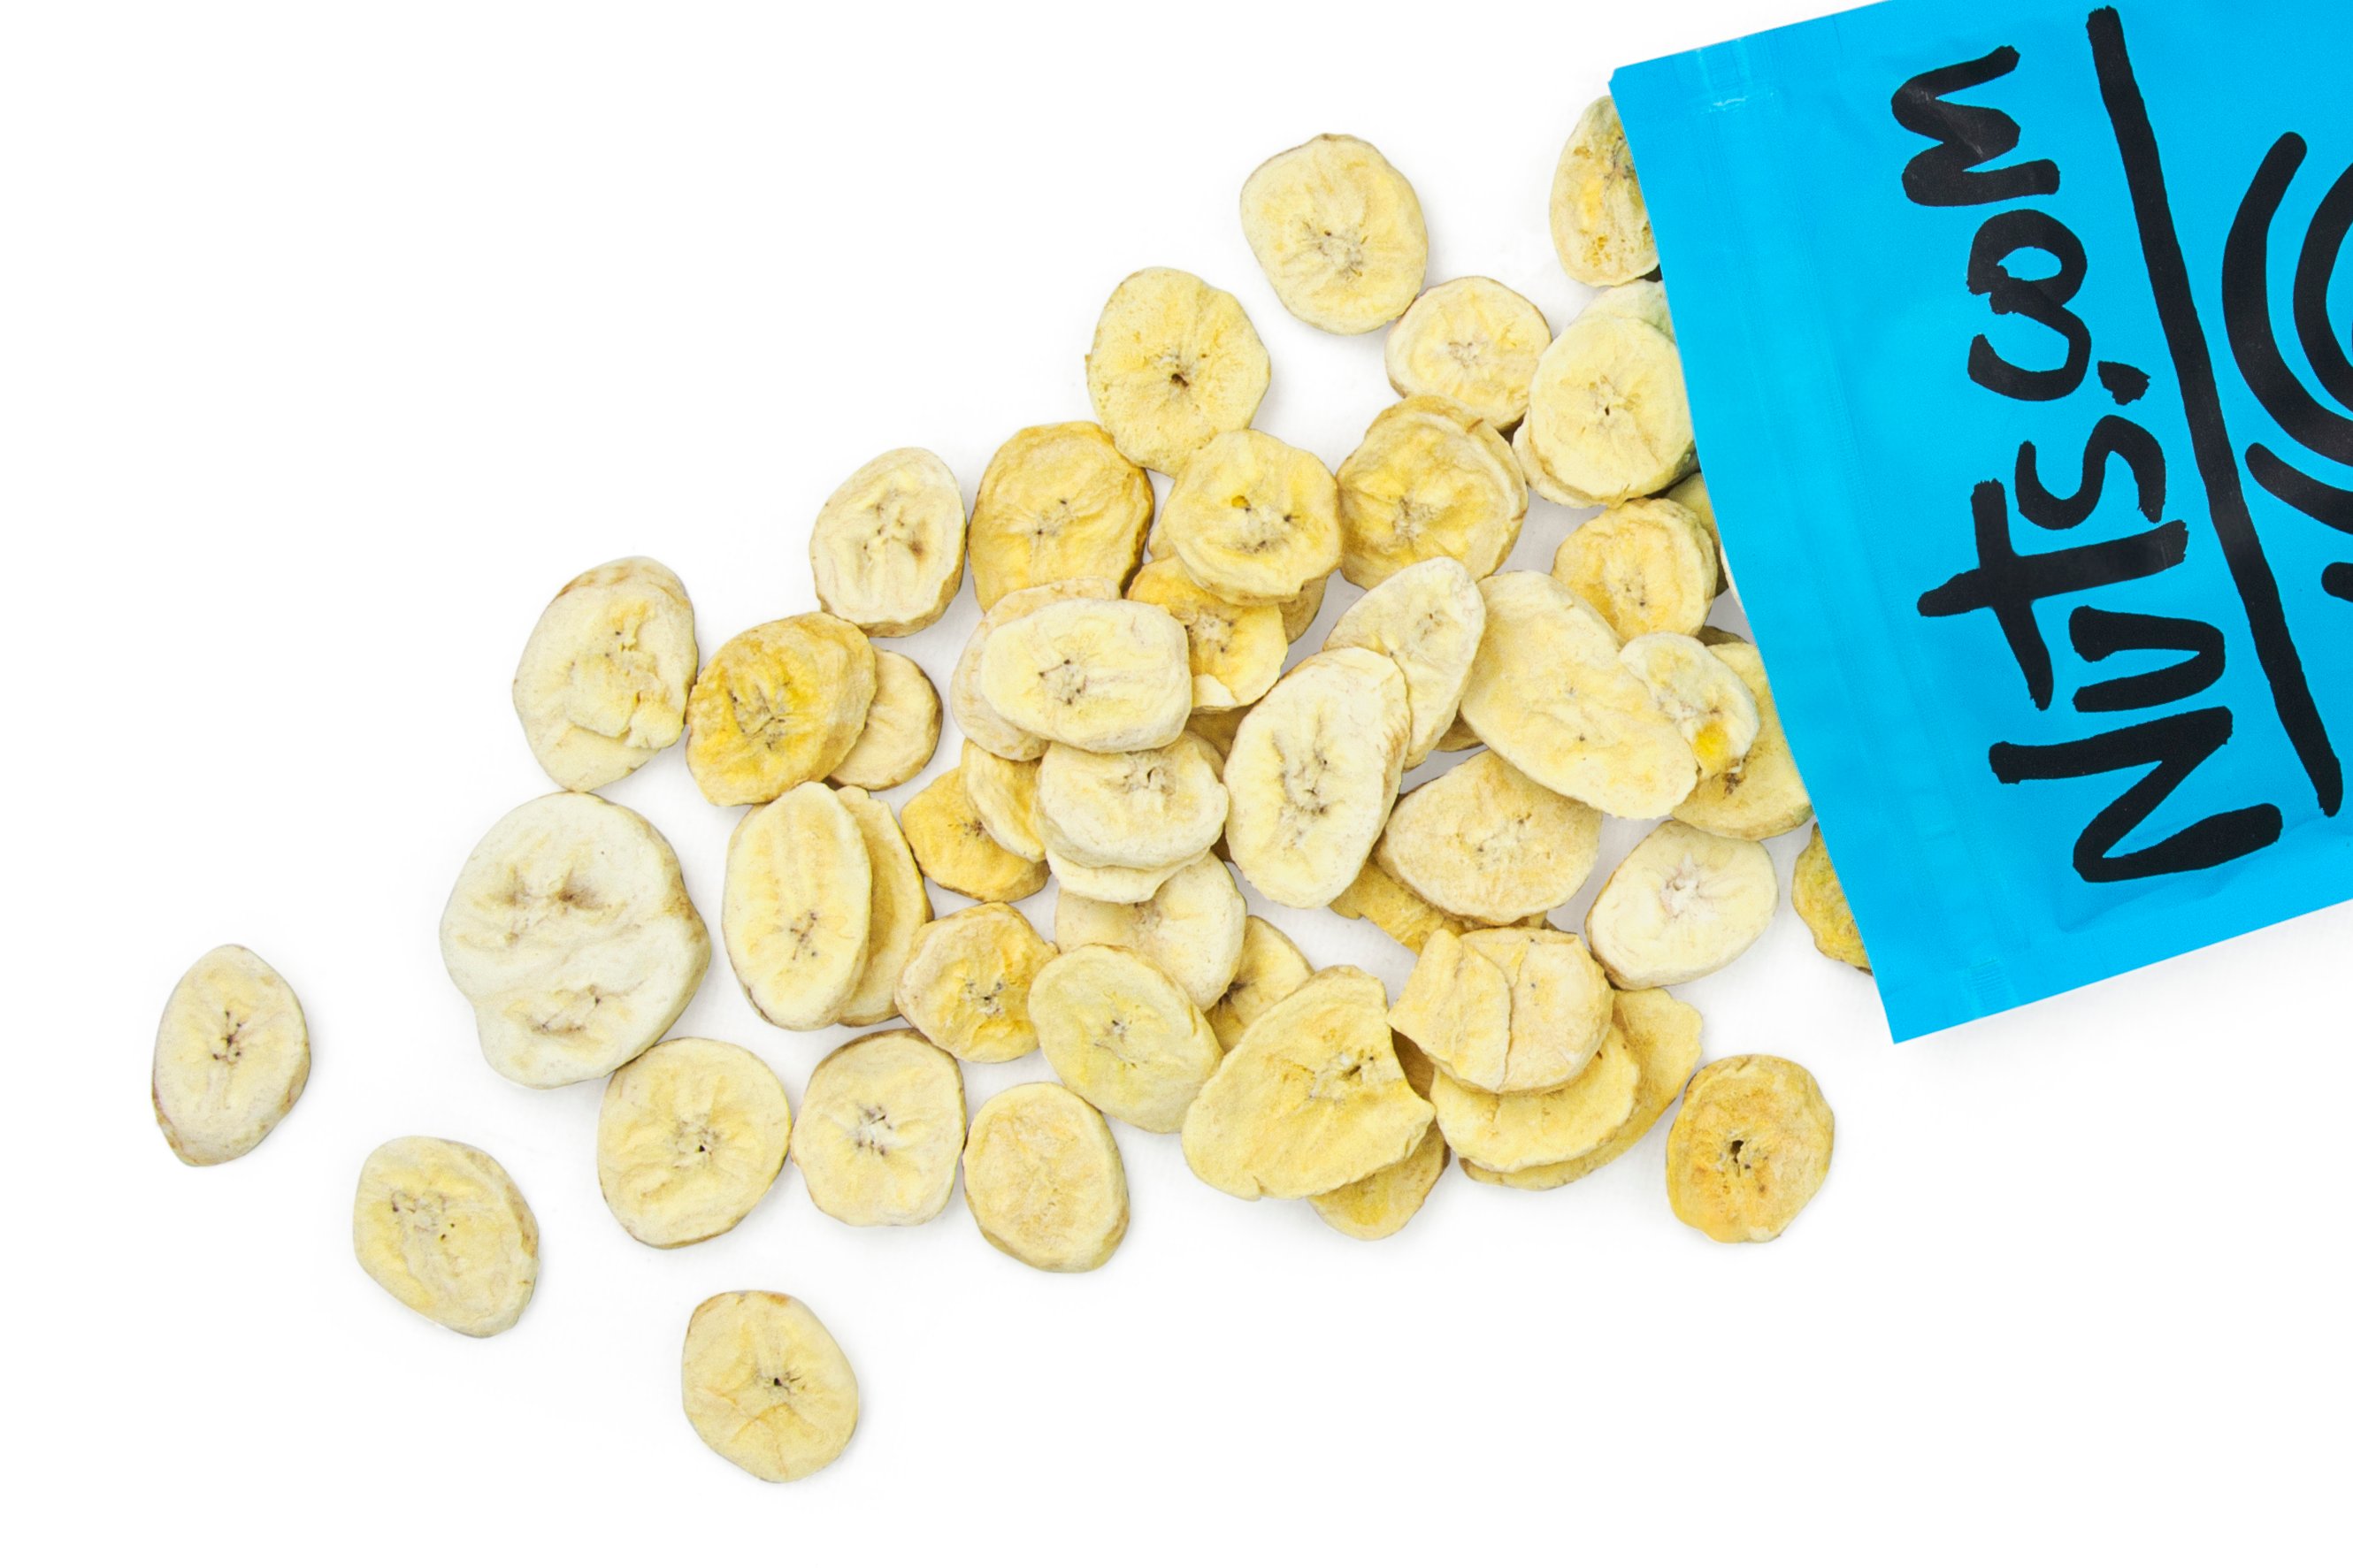 Natures All Foods Banana, Organic, Freeze-Dried, Dried Fruit